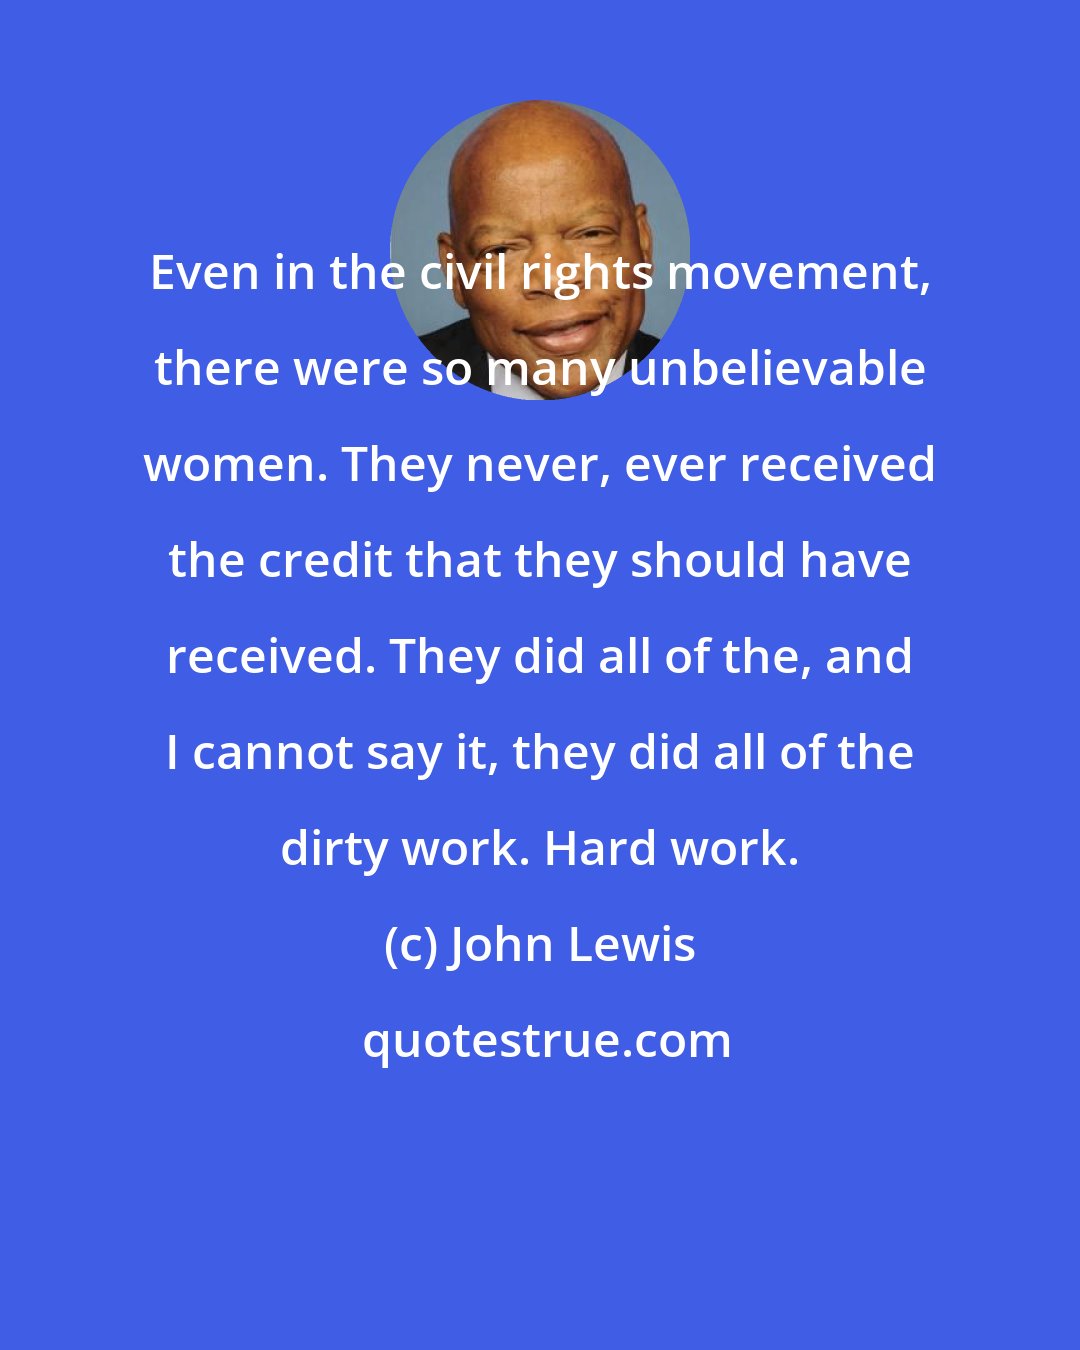 John Lewis: Even in the civil rights movement, there were so many unbelievable women. They never, ever received the credit that they should have received. They did all of the, and I cannot say it, they did all of the dirty work. Hard work.